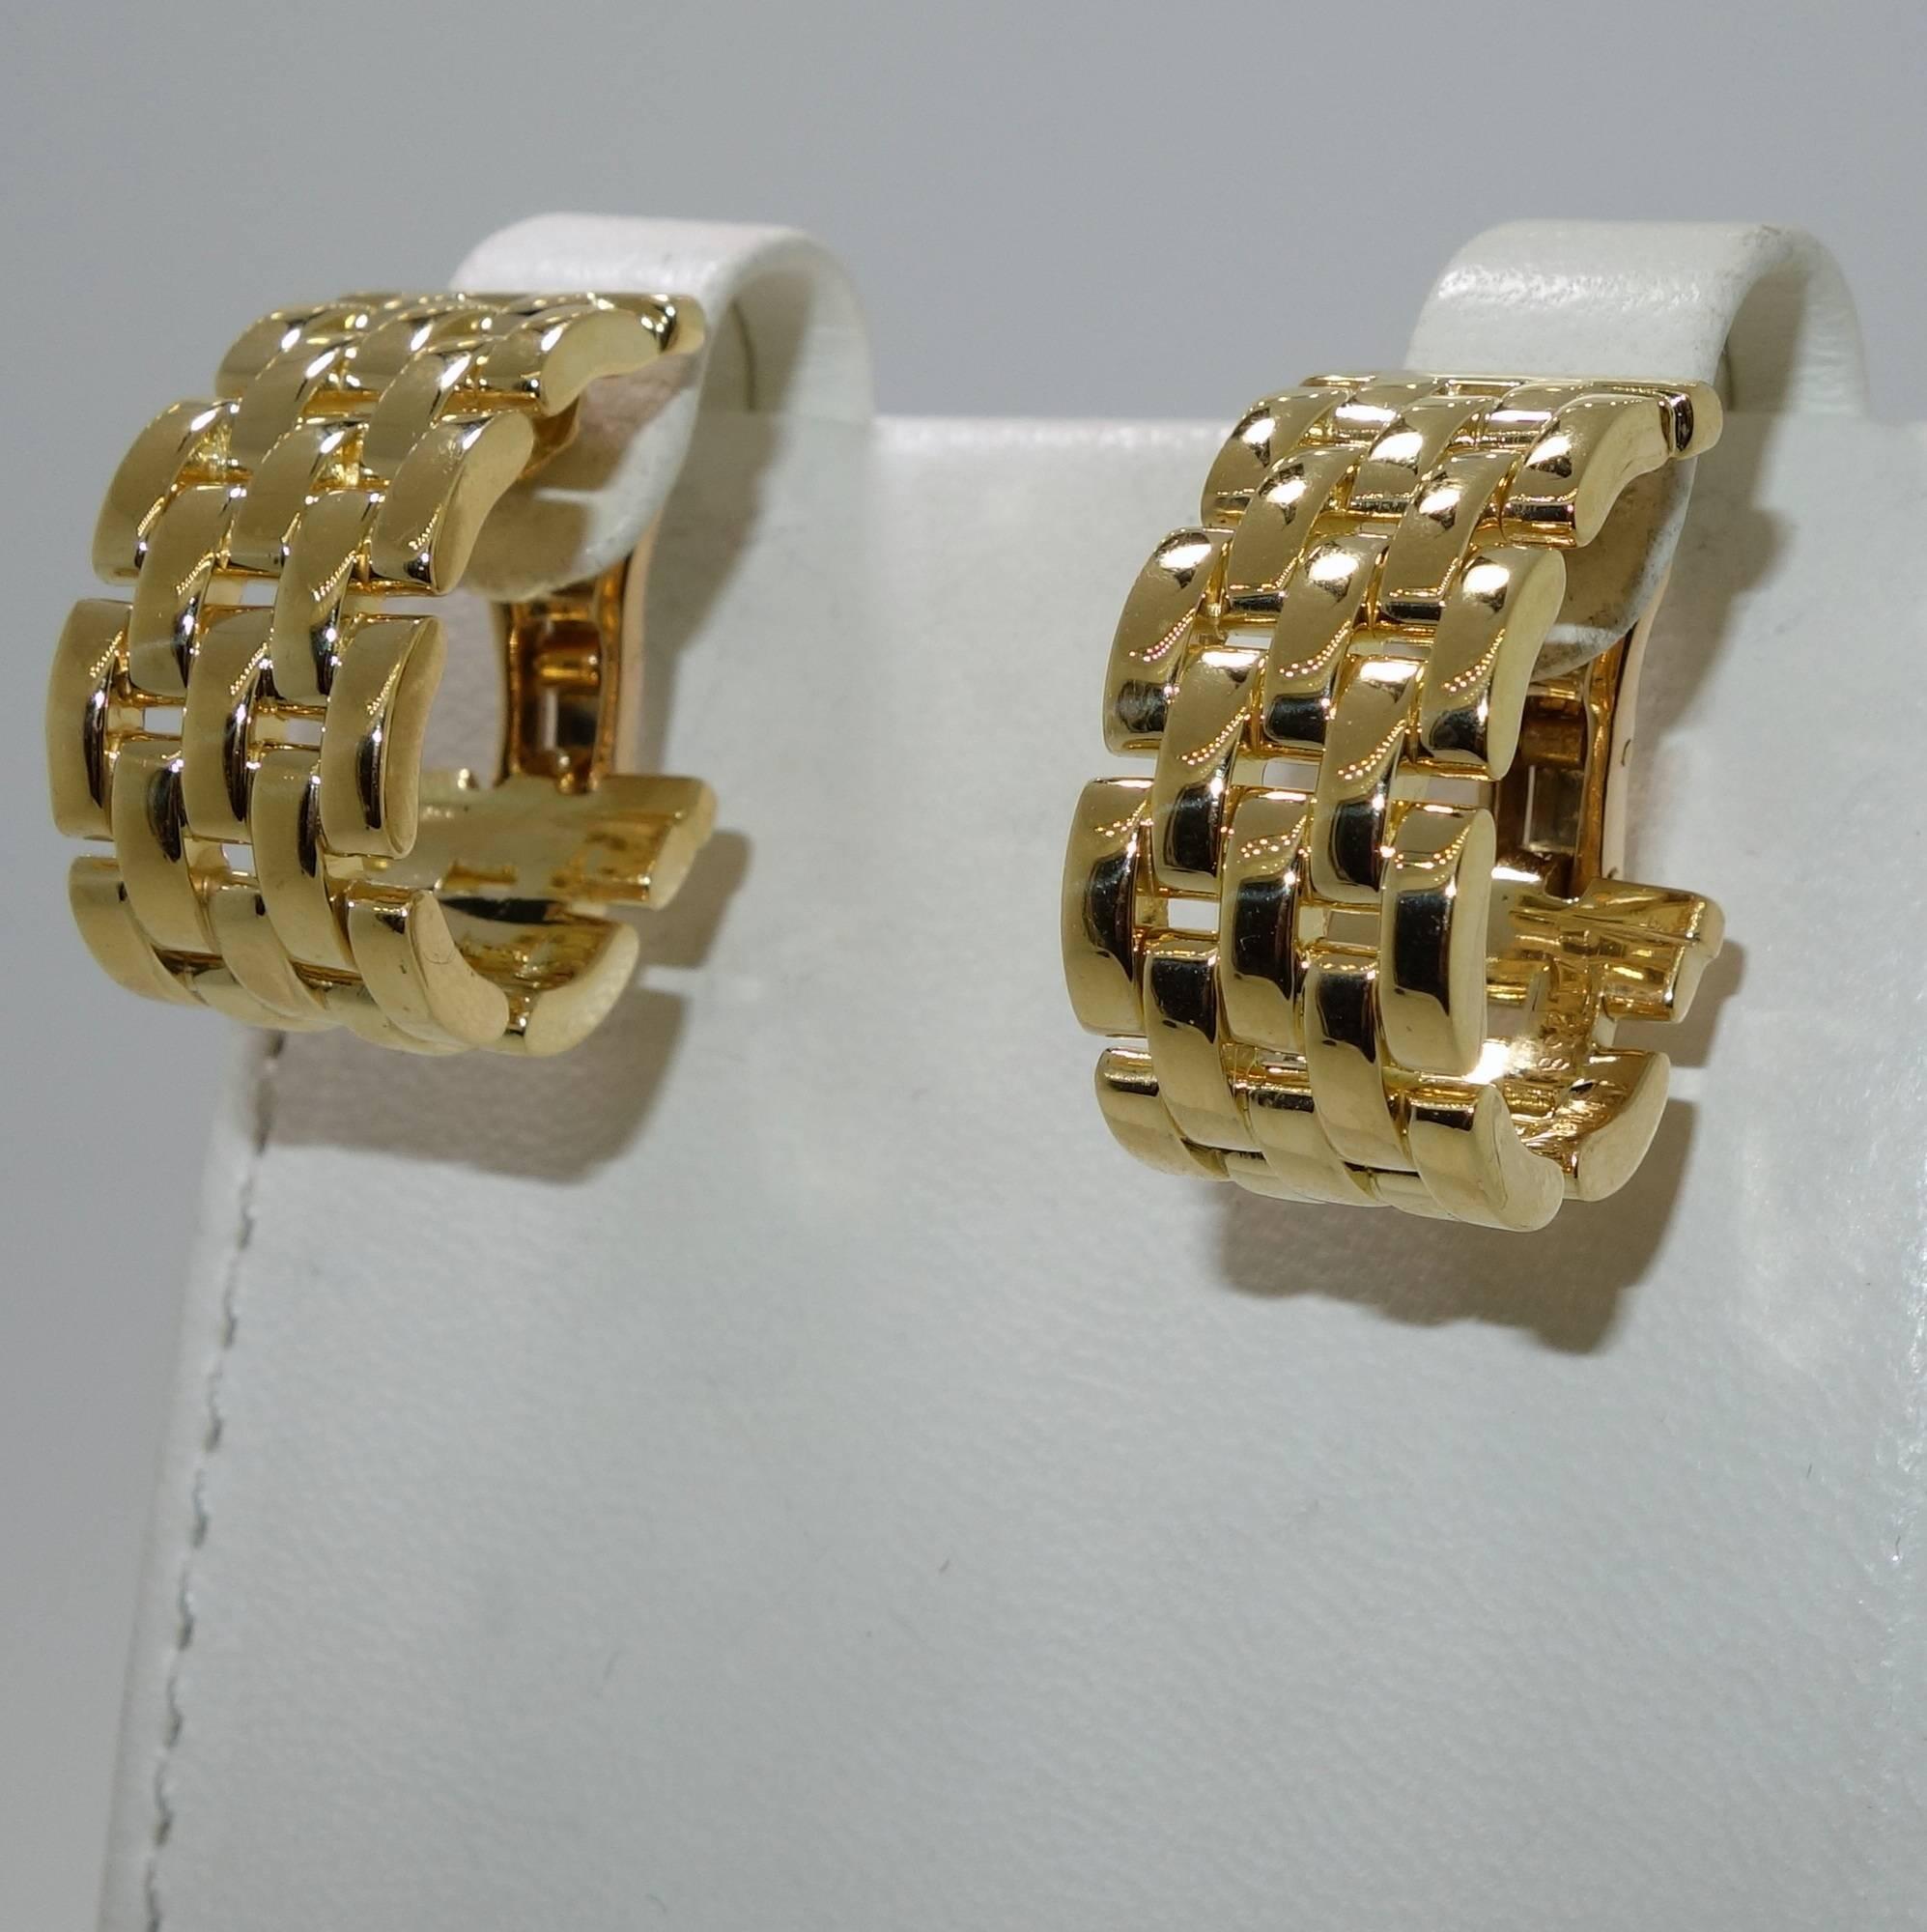 The length is just shy of two inches long, they are .5 inches wide.  They are signed and numbered by Cartier on the interior of the earrings with the stamp of 750 for 18K gold.  24.14 grams.